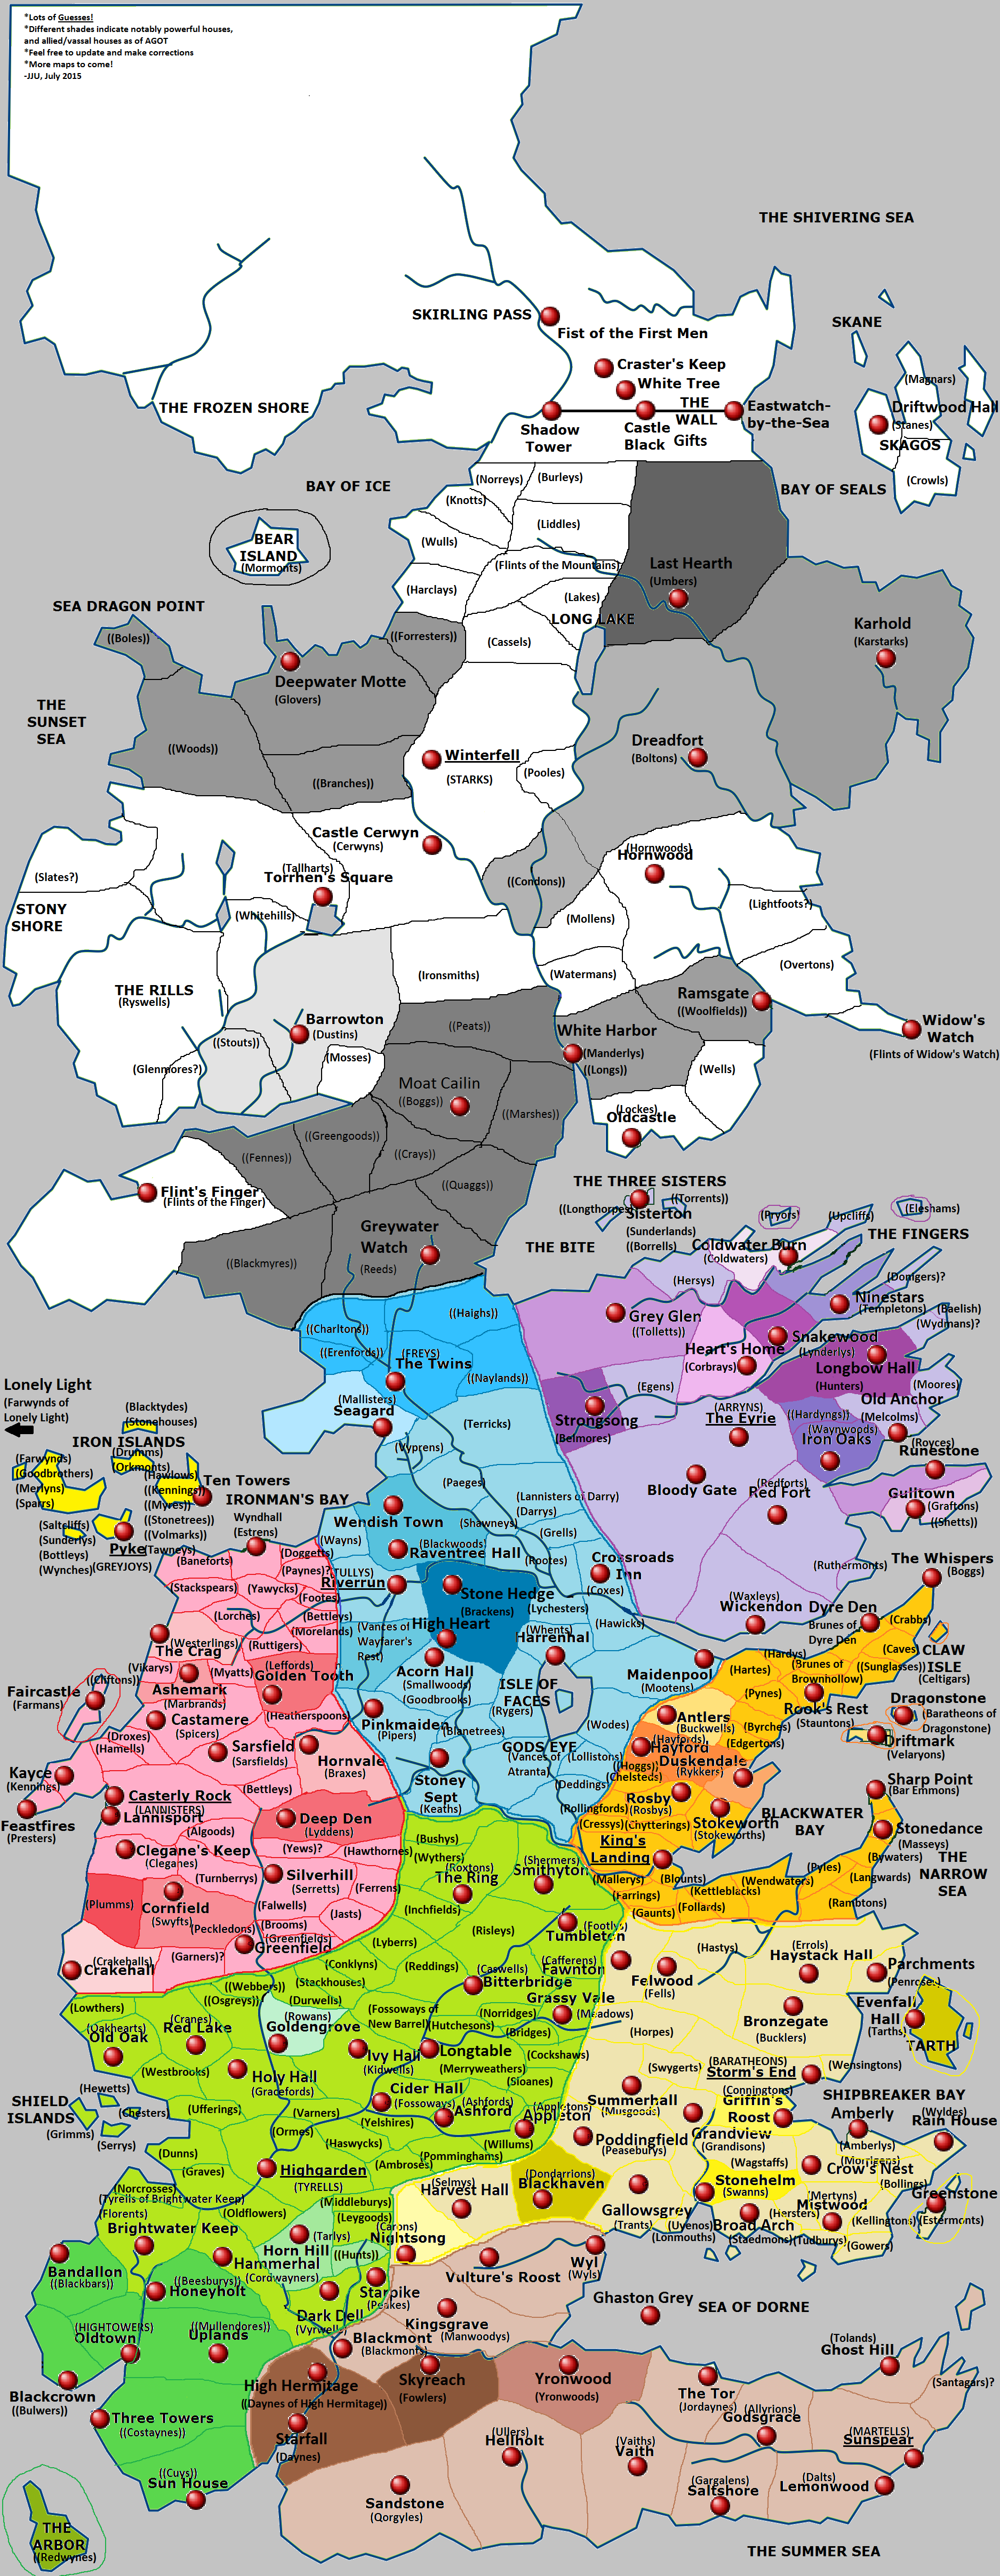 map-of-westeros-game-of-thrones.png